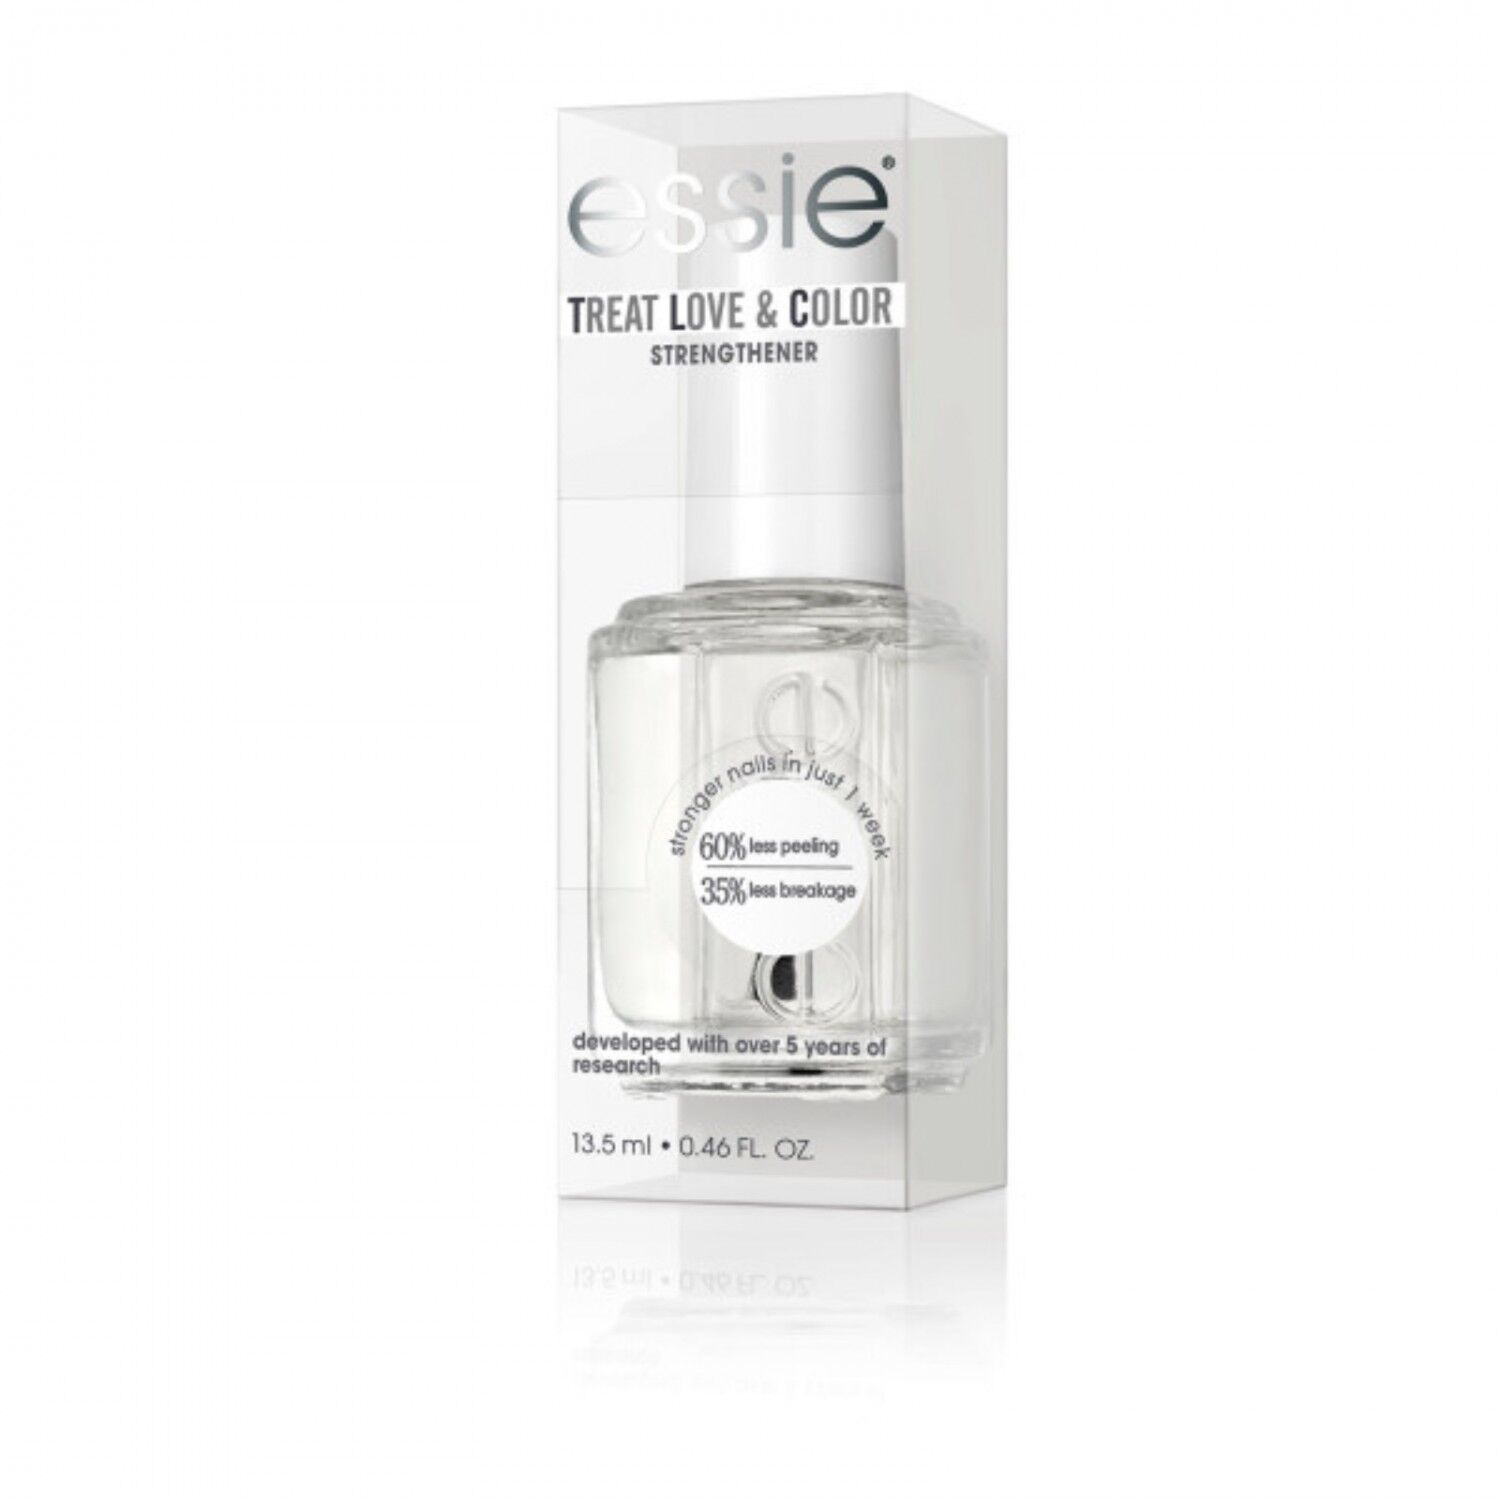 EssieTreat Love&Color Strengthener 00-gloss fit